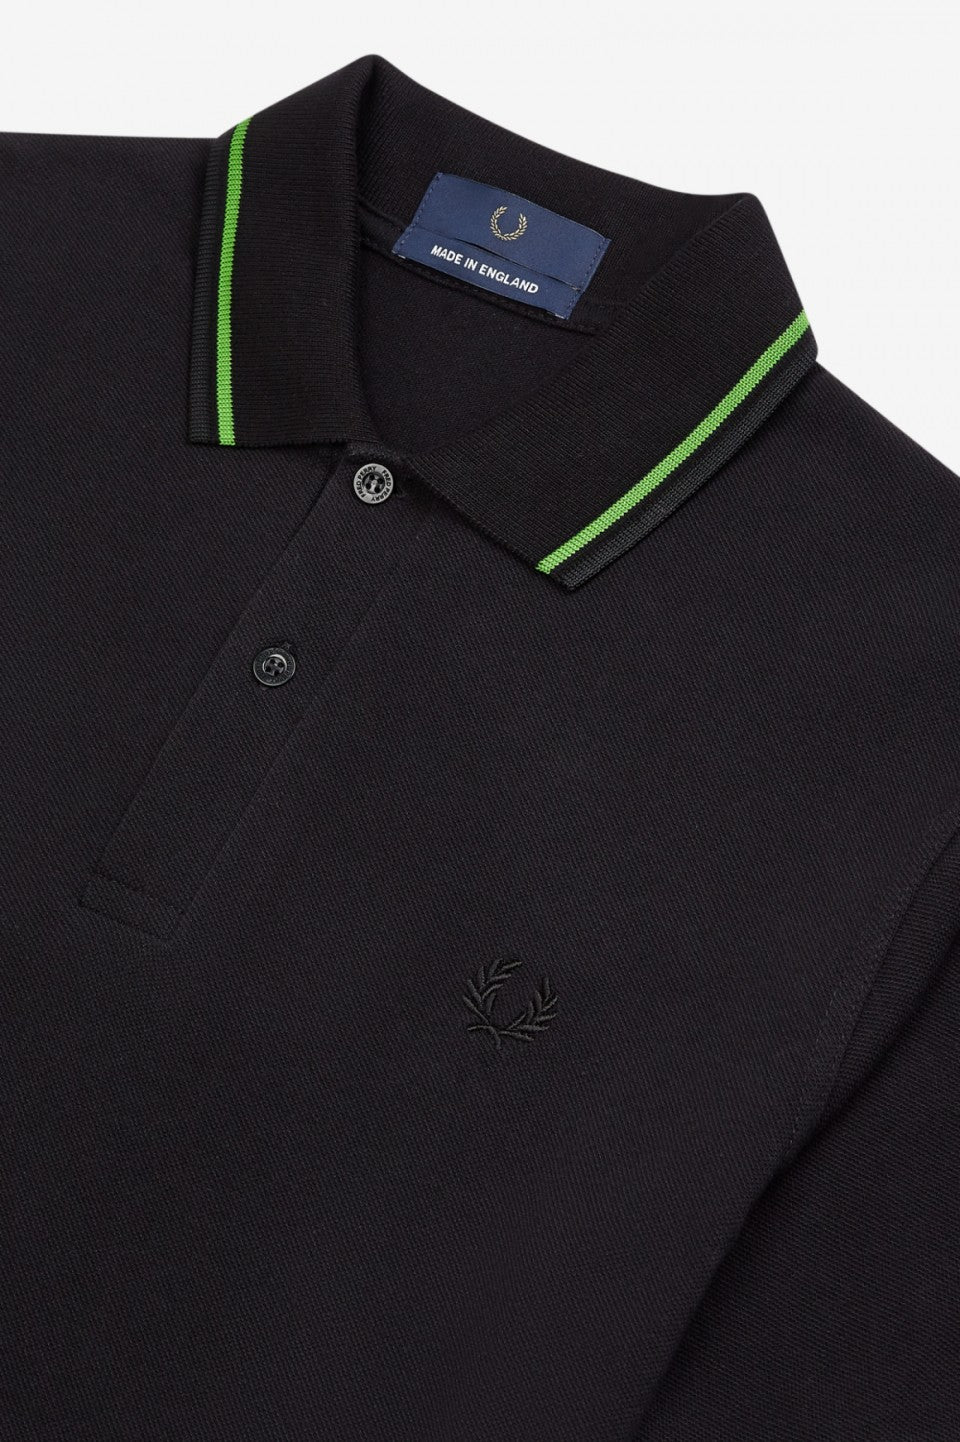 fred perry twin tipped polo black